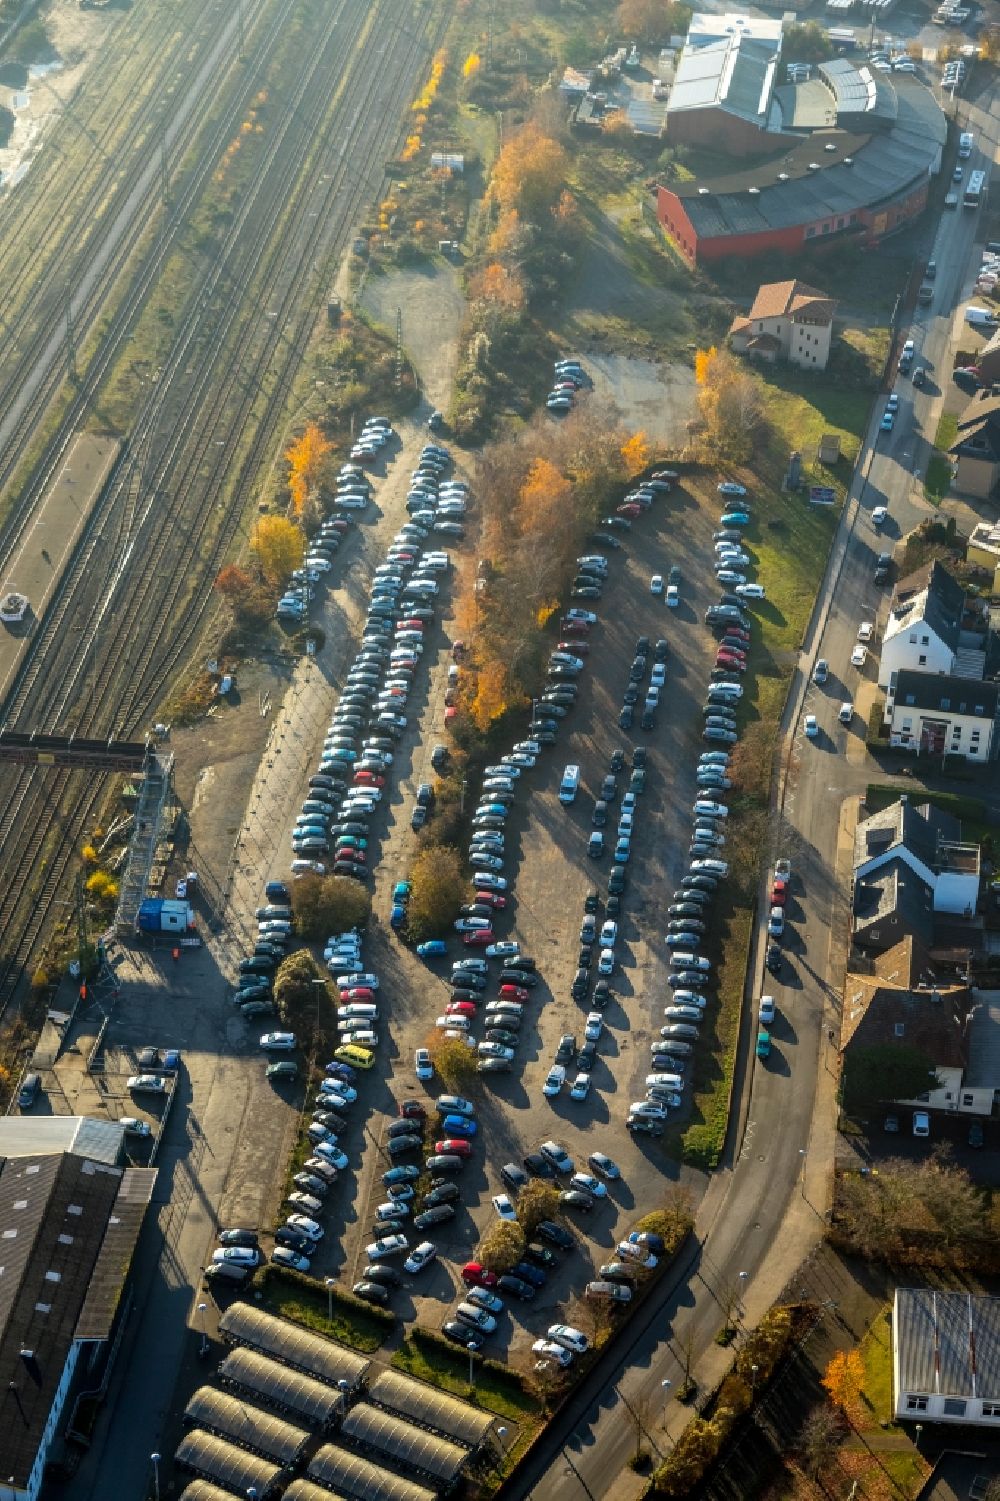 Haltern am See from the bird's eye view: Parking and storage space for automobiles at the train station in Haltern am See in the state North Rhine-Westphalia, Germany